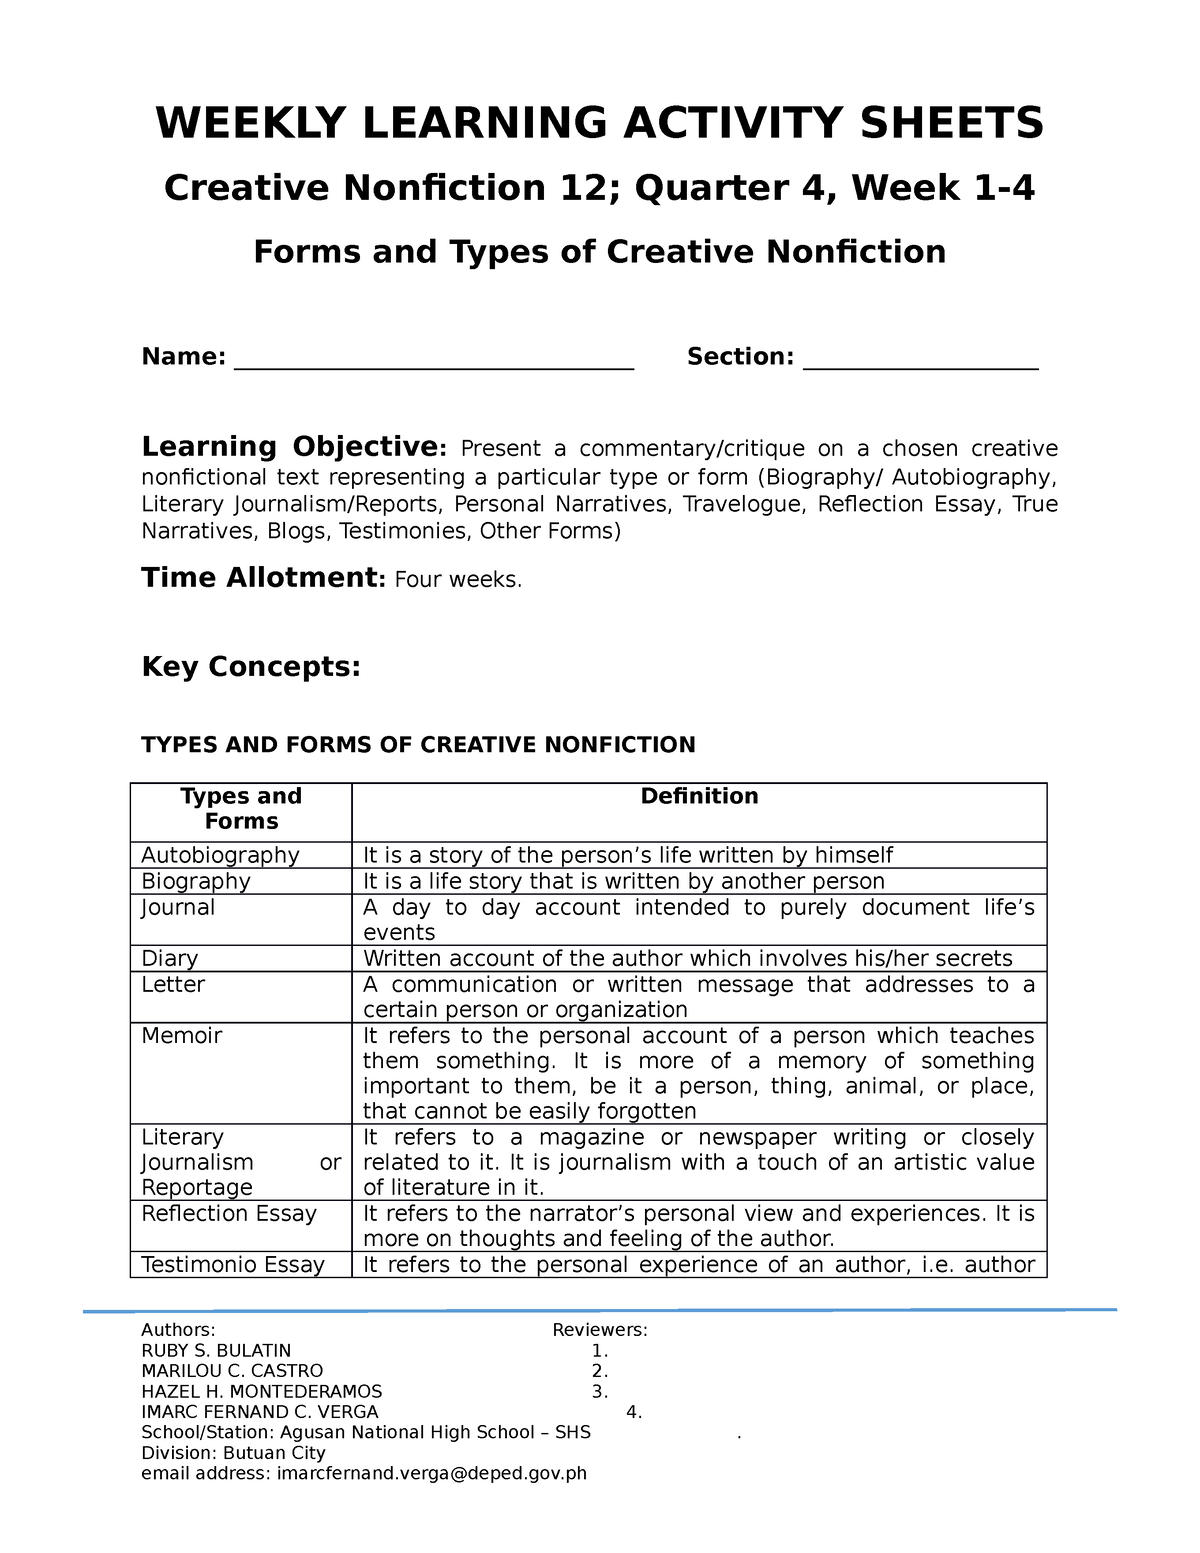 Cnf Q4 W1 4 Melc 1 Stem Science Technology Engineering And Mathematics Weekly Learning 8393